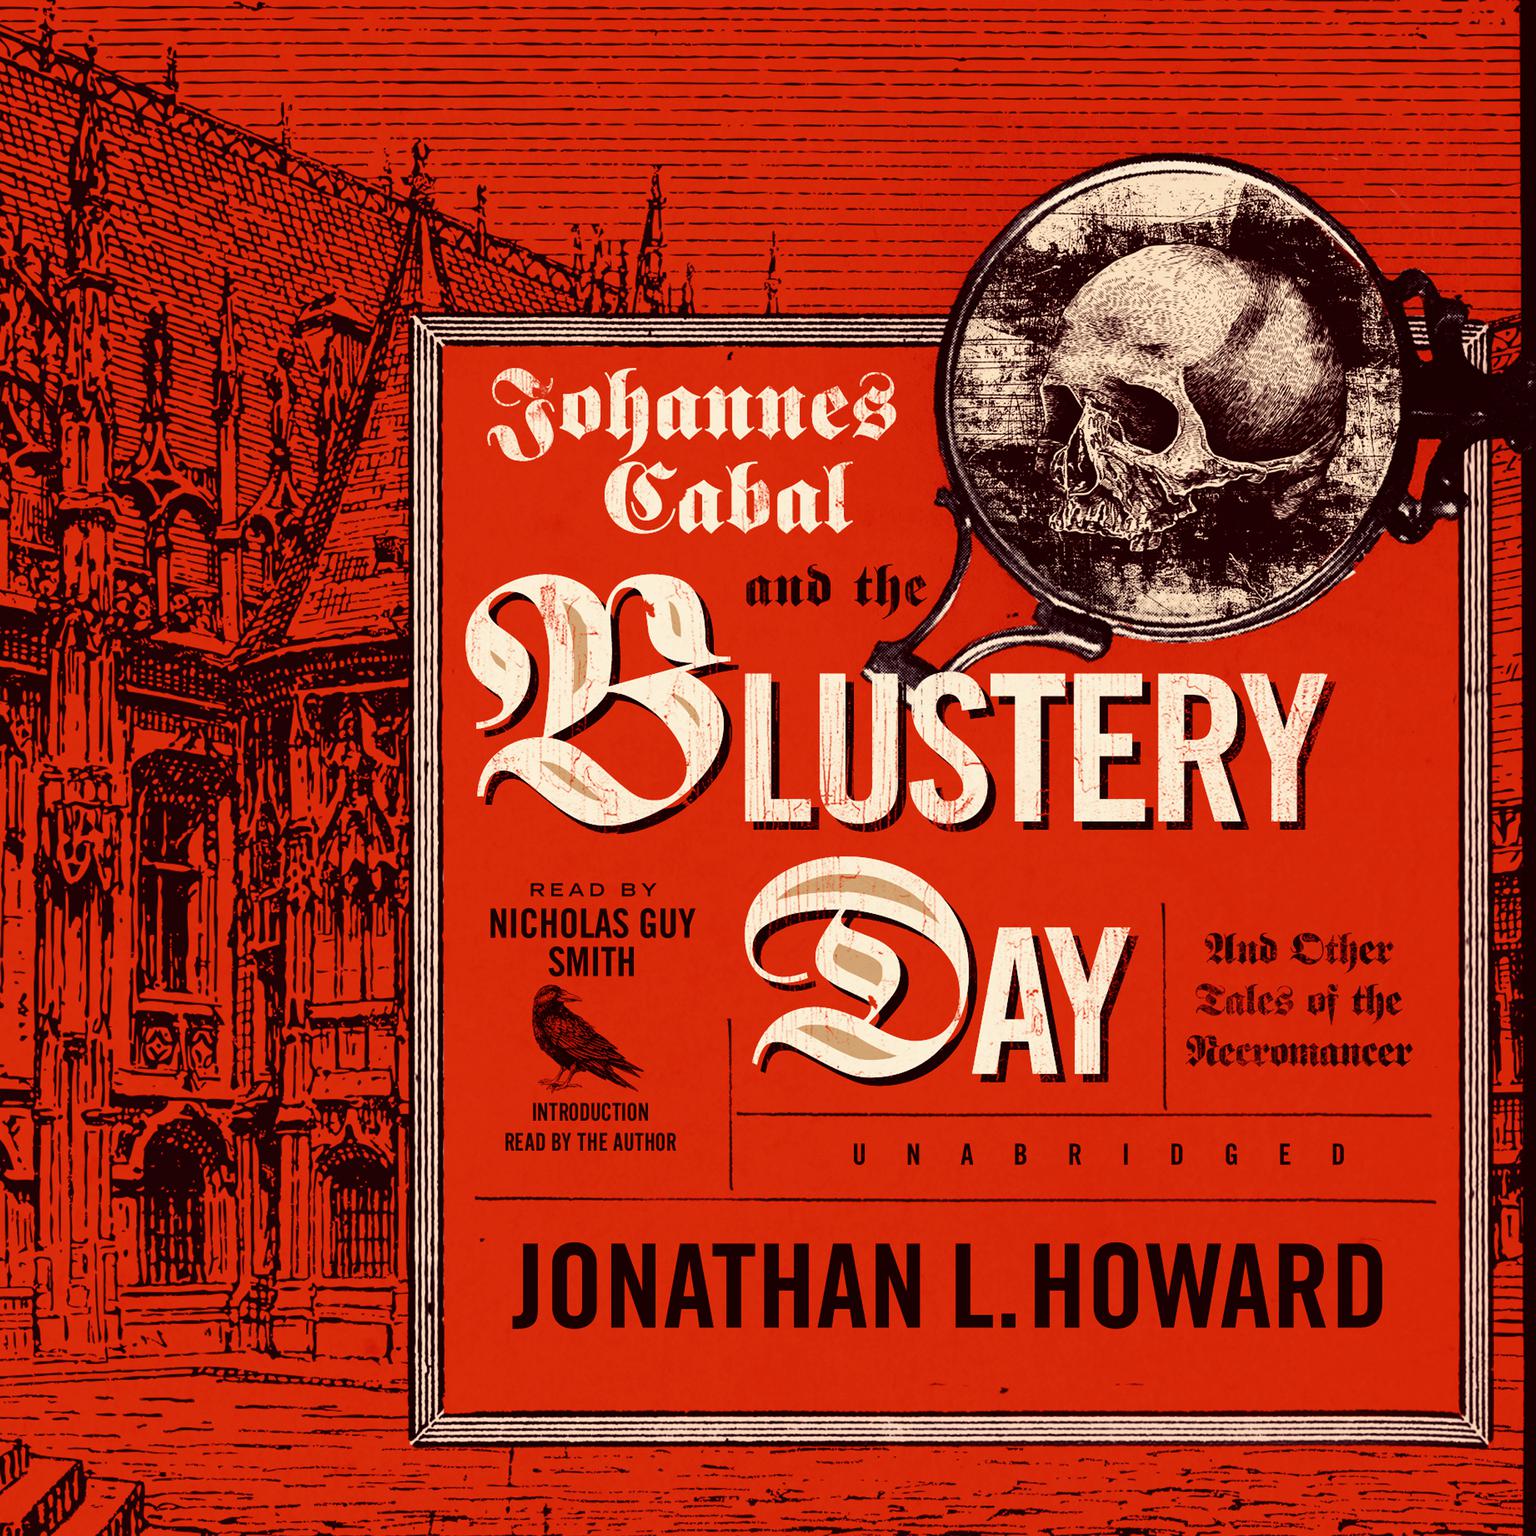 Johannes Cabal and the Blustery Day: And Other Tales of the Necromancer Audiobook, by Jonathan L. Howard